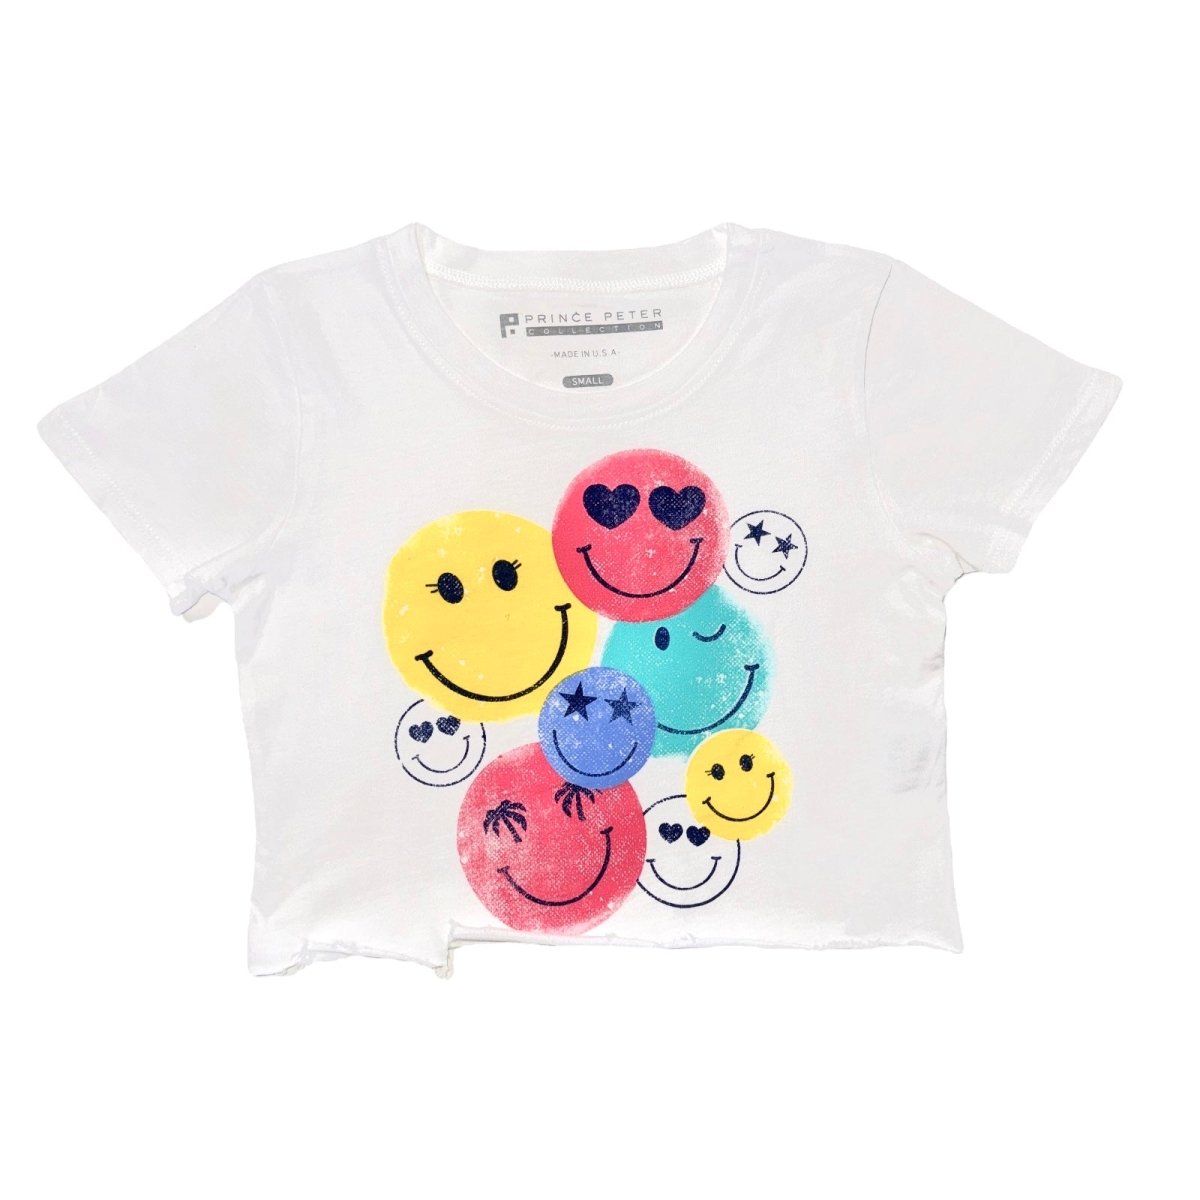 MANY HAPPY FACES TSHIRT - PRINCE PETER